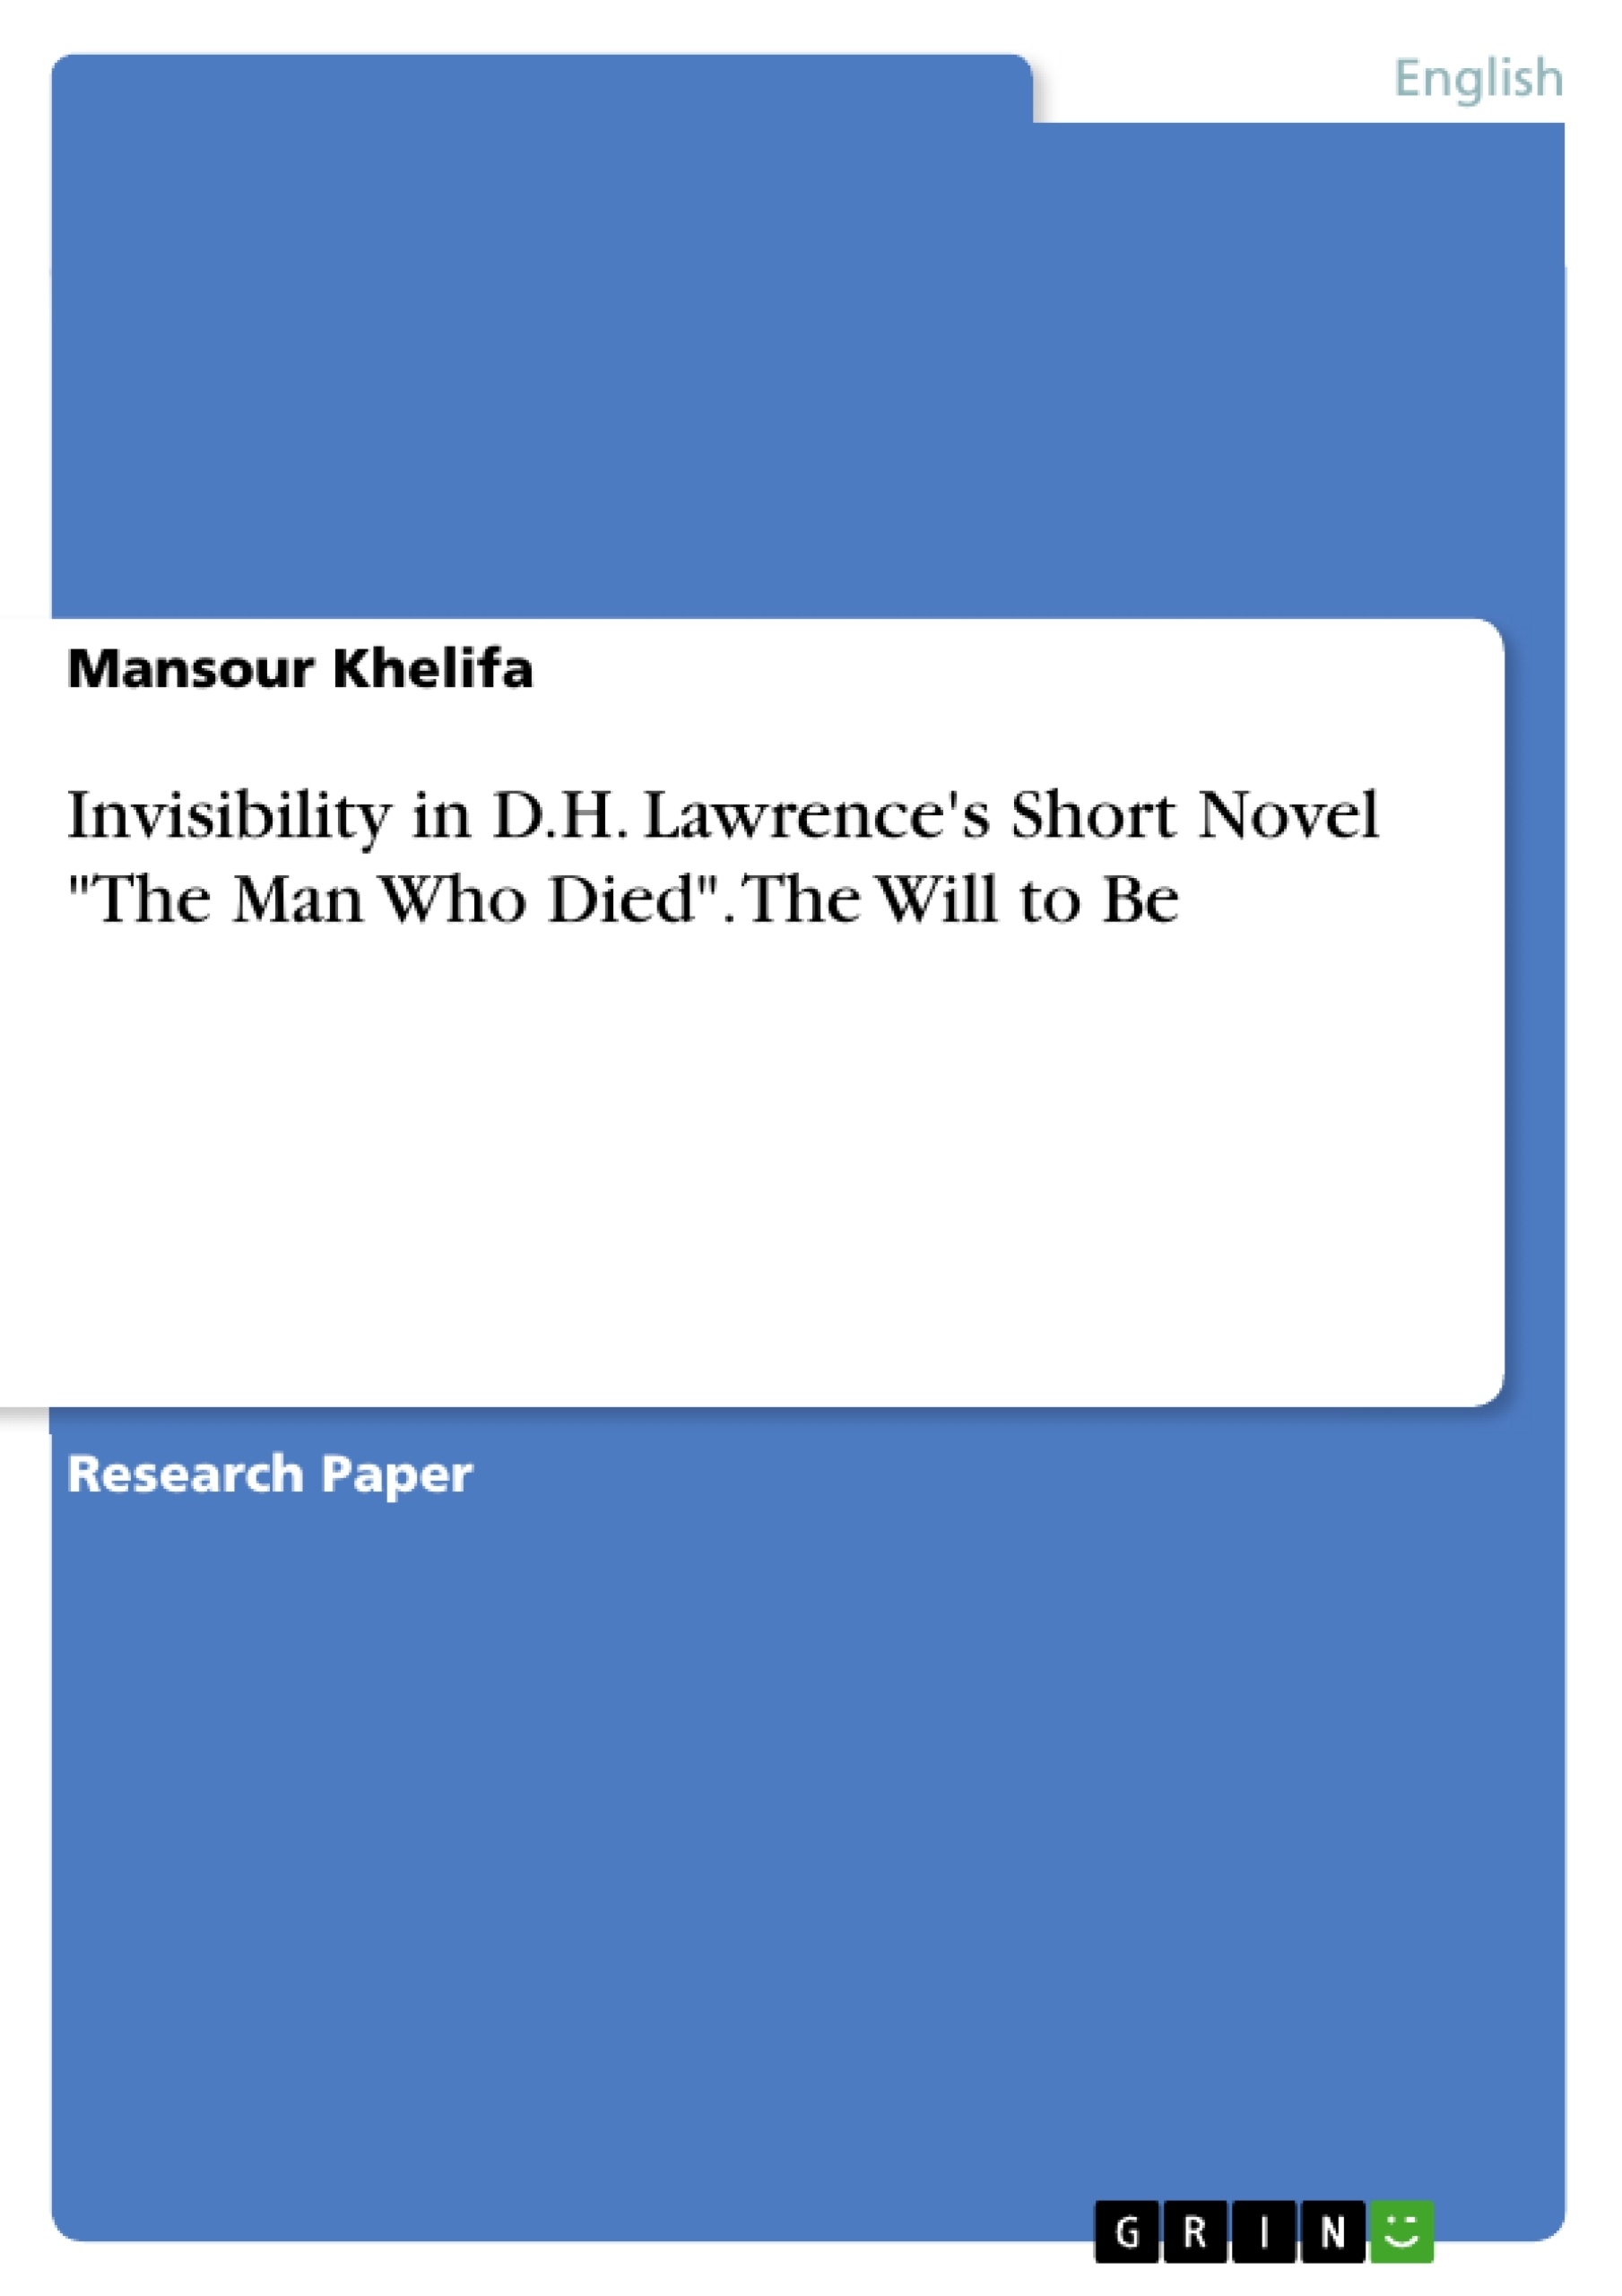 Título: Invisibility in D.H. Lawrence's Short Novel "The Man Who Died". The Will to Be